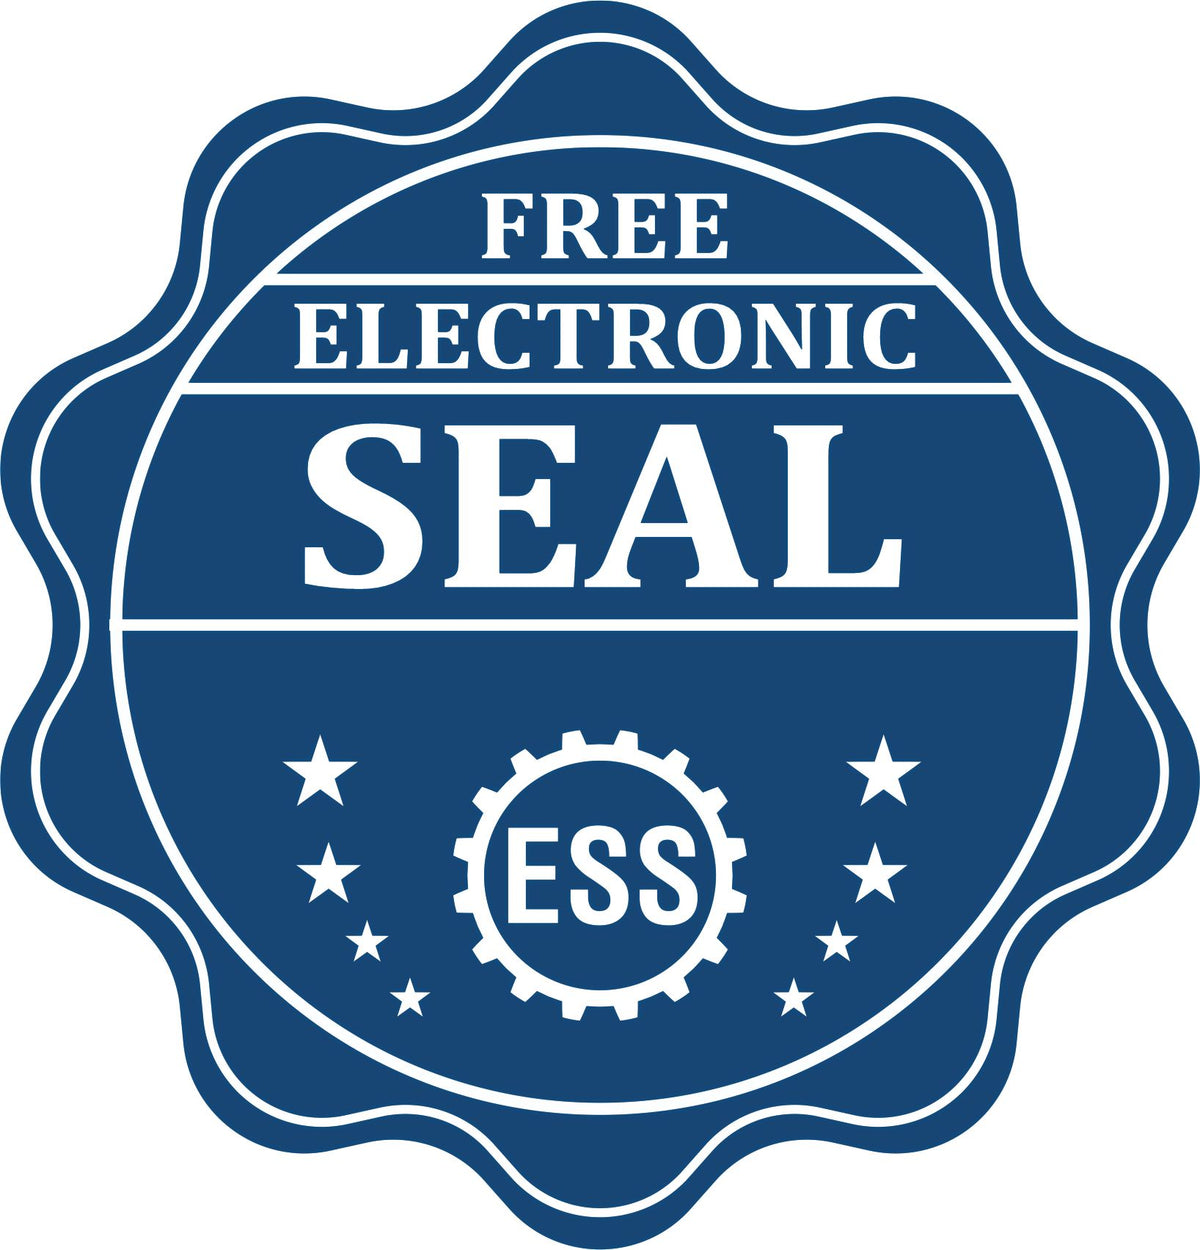 A badge showing a free electronic seal for the Gift Wyoming Landscape Architect Seal with stars and the ESS gear on the emblem.